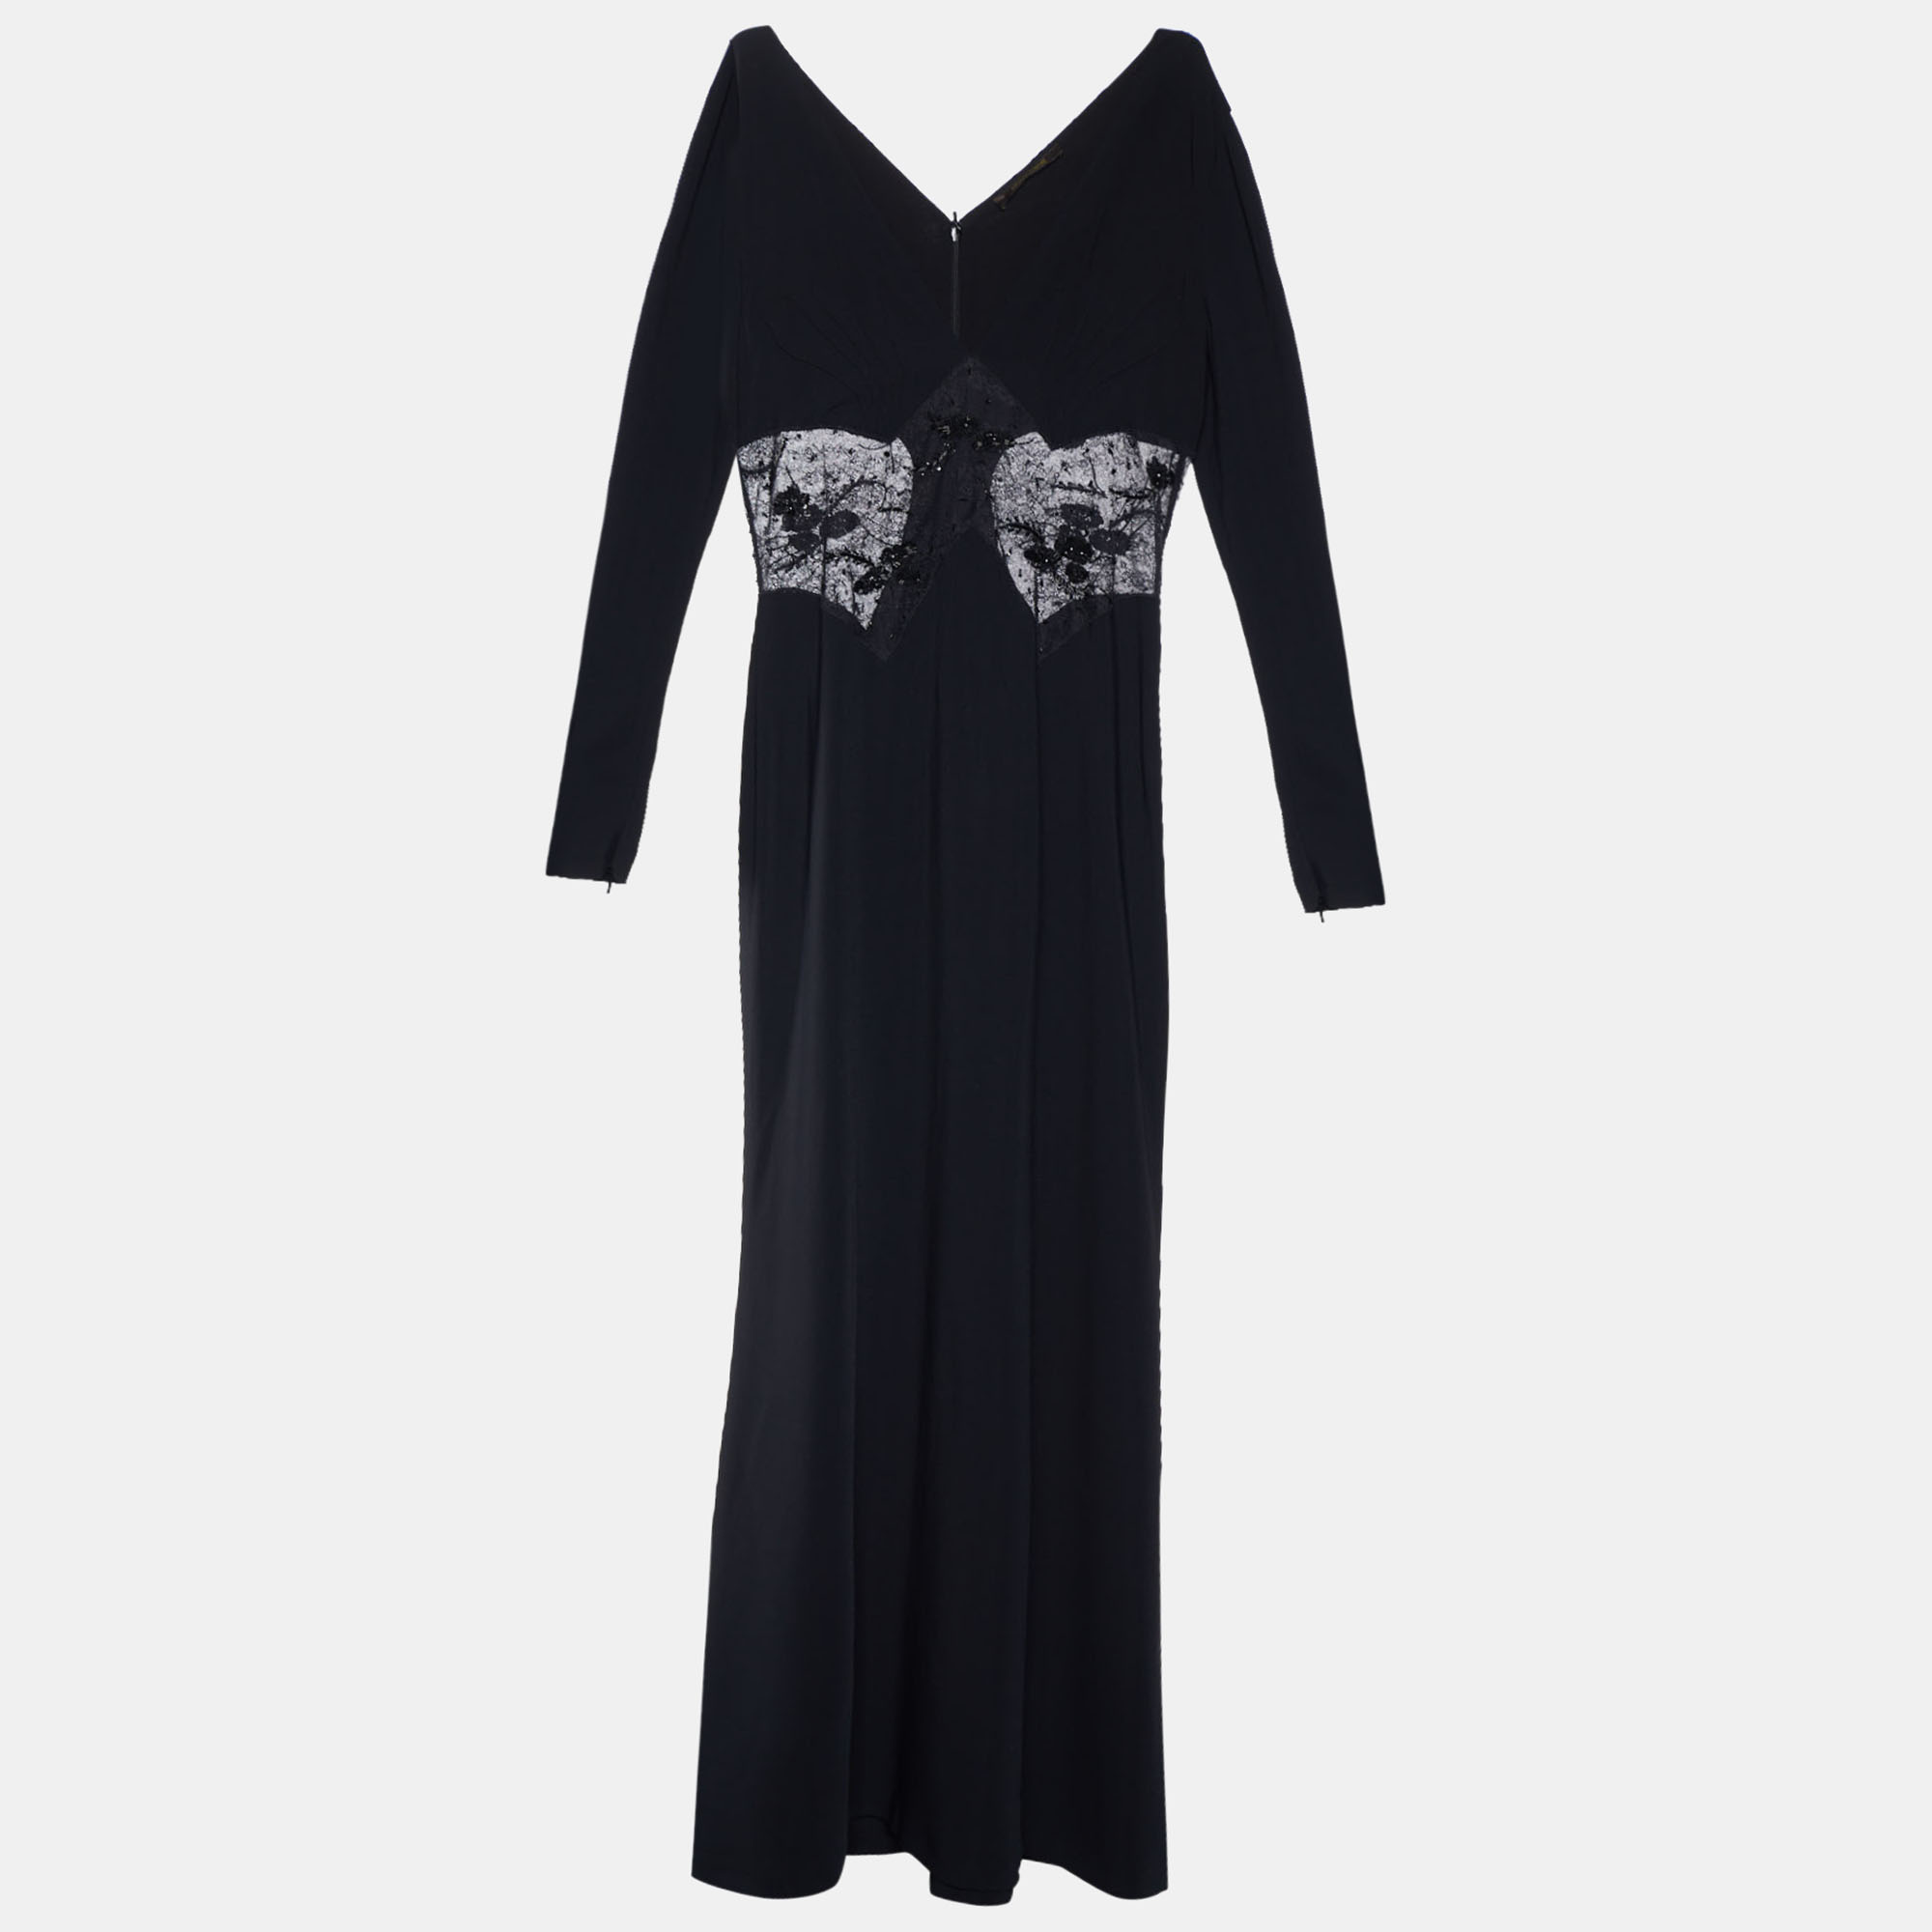 Roberto cavalli black crepe & embellished lace gown l